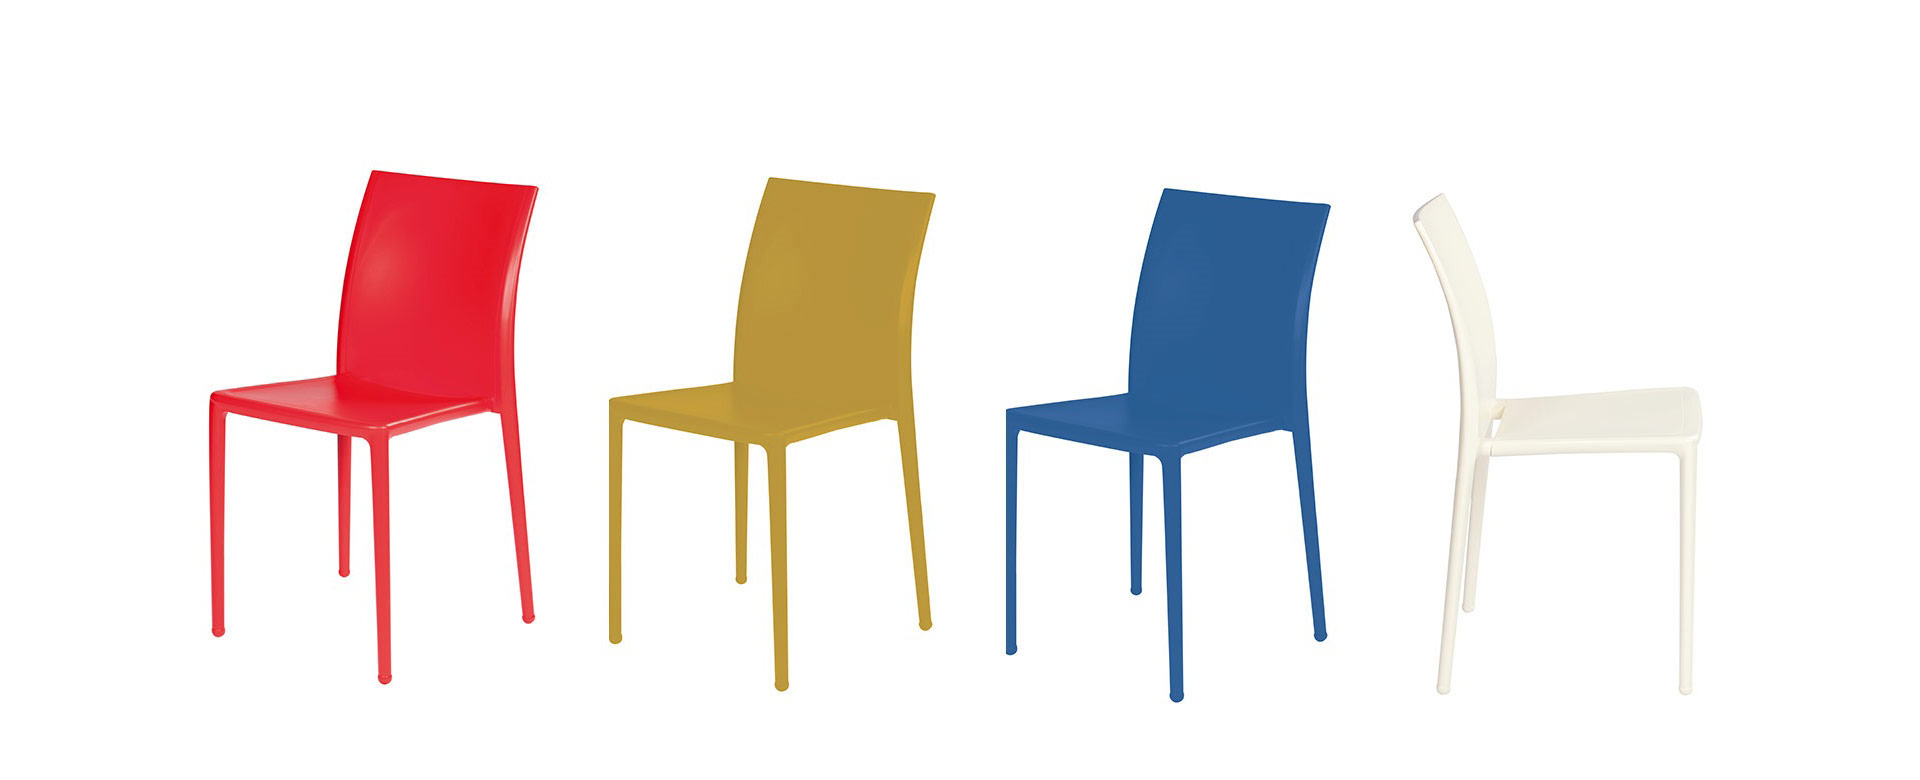 LUCIDO Outdoor Chairs